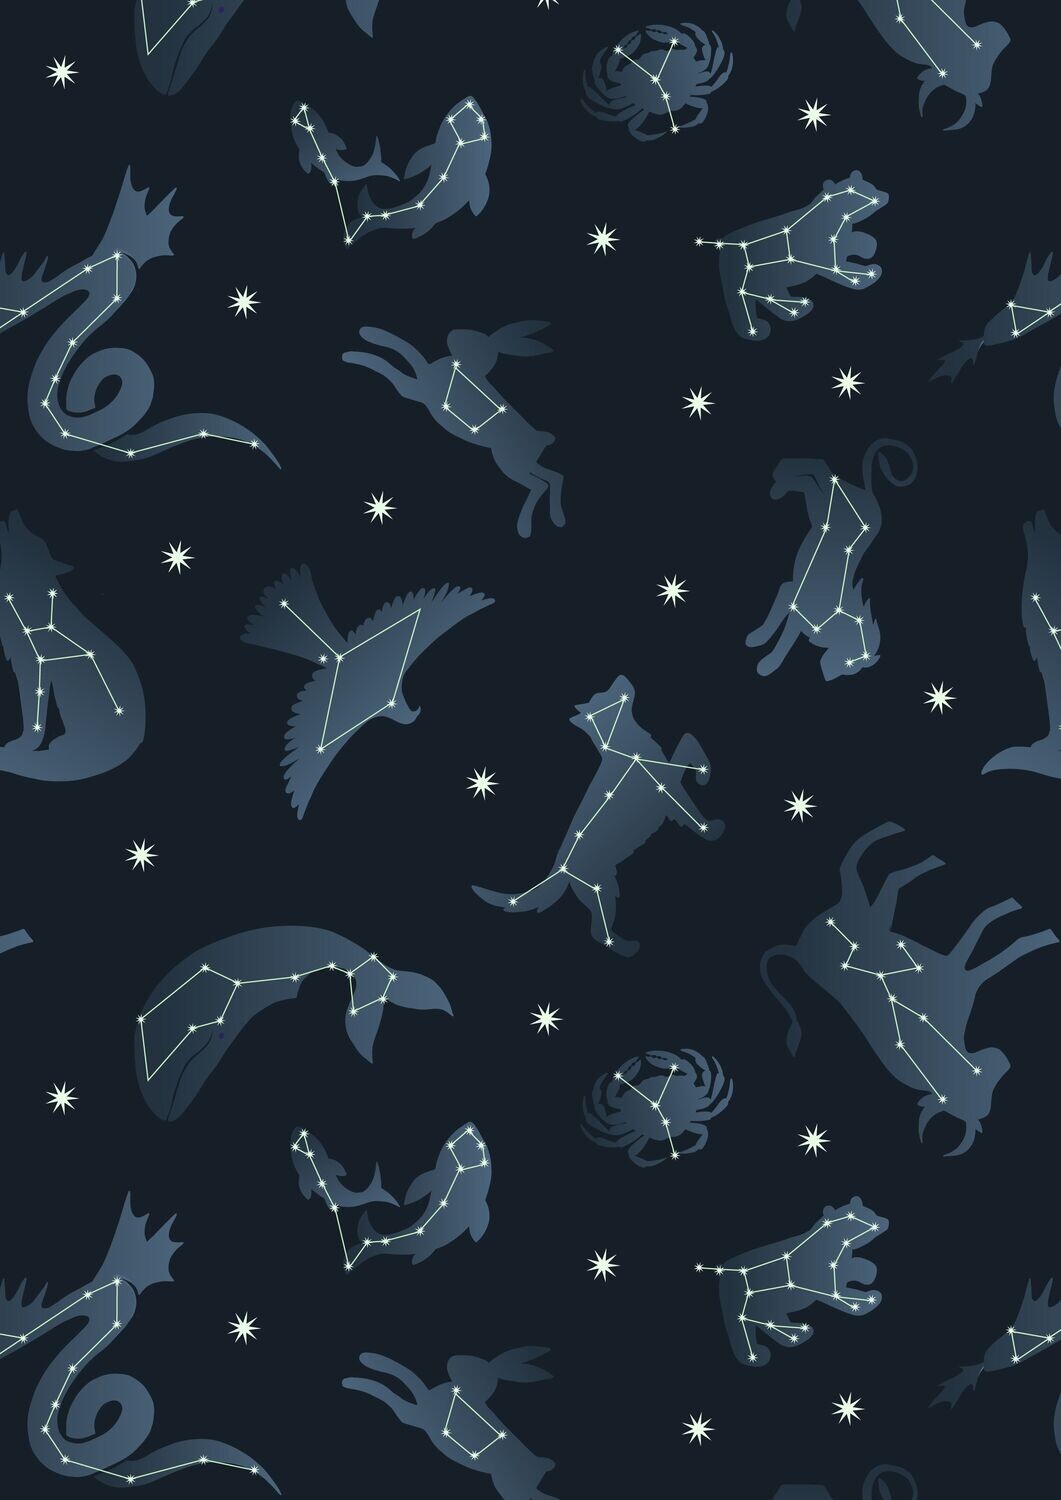 Constellations Grey - GLOW IN THE DARK - Cotton - From Fat Quarter